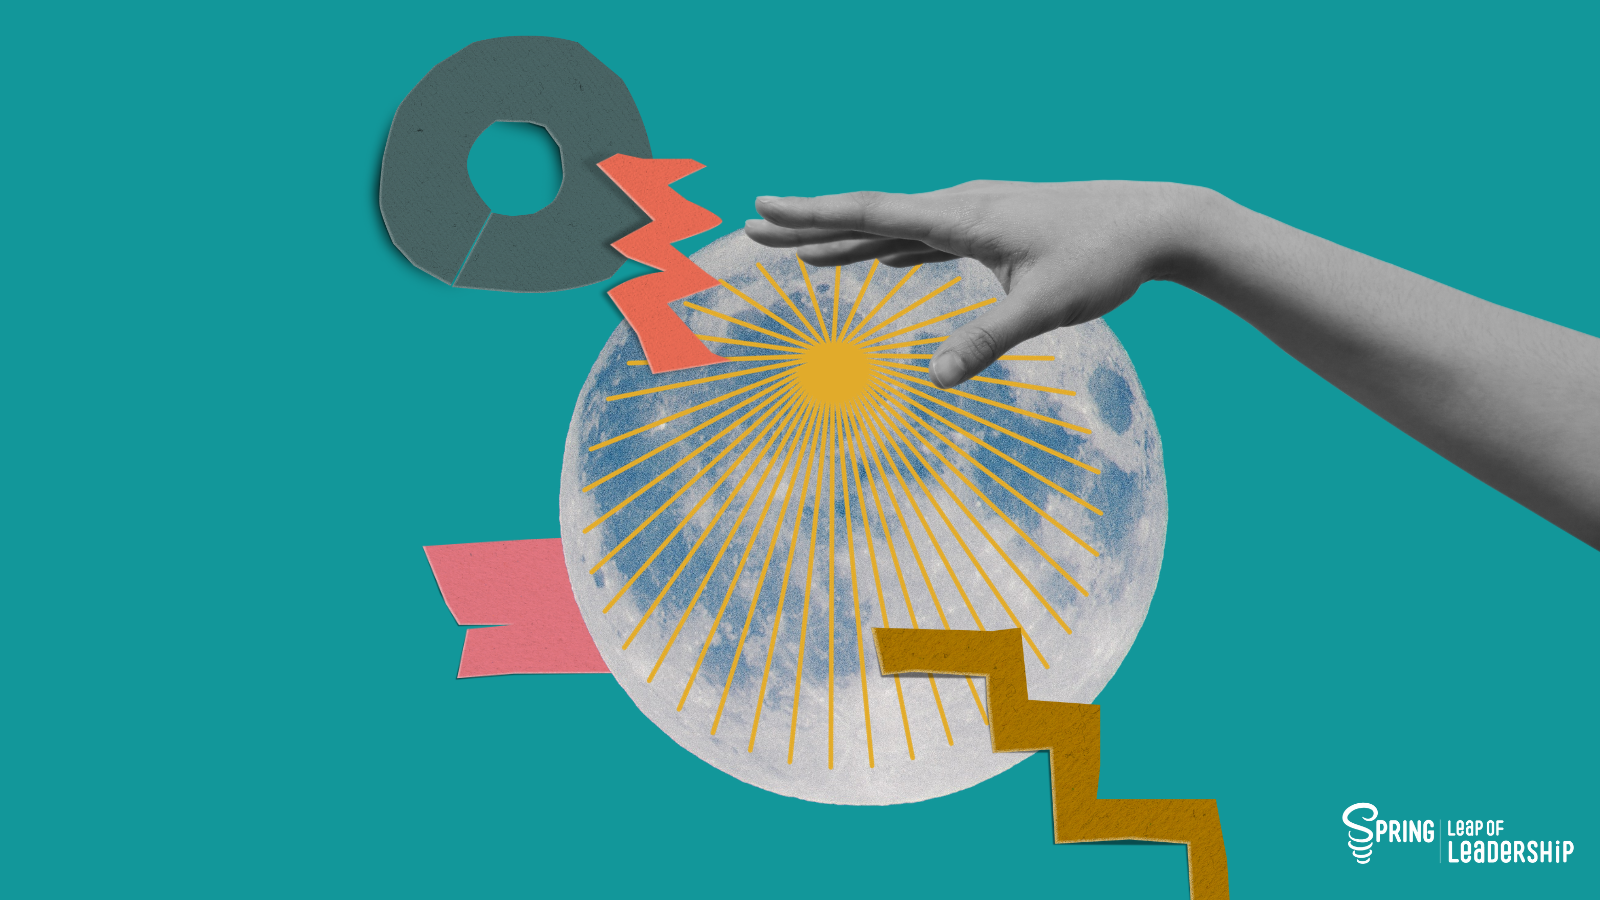 A collage of a globe and colorful shapes on a teal background with a black and white image of an arm reaching over it